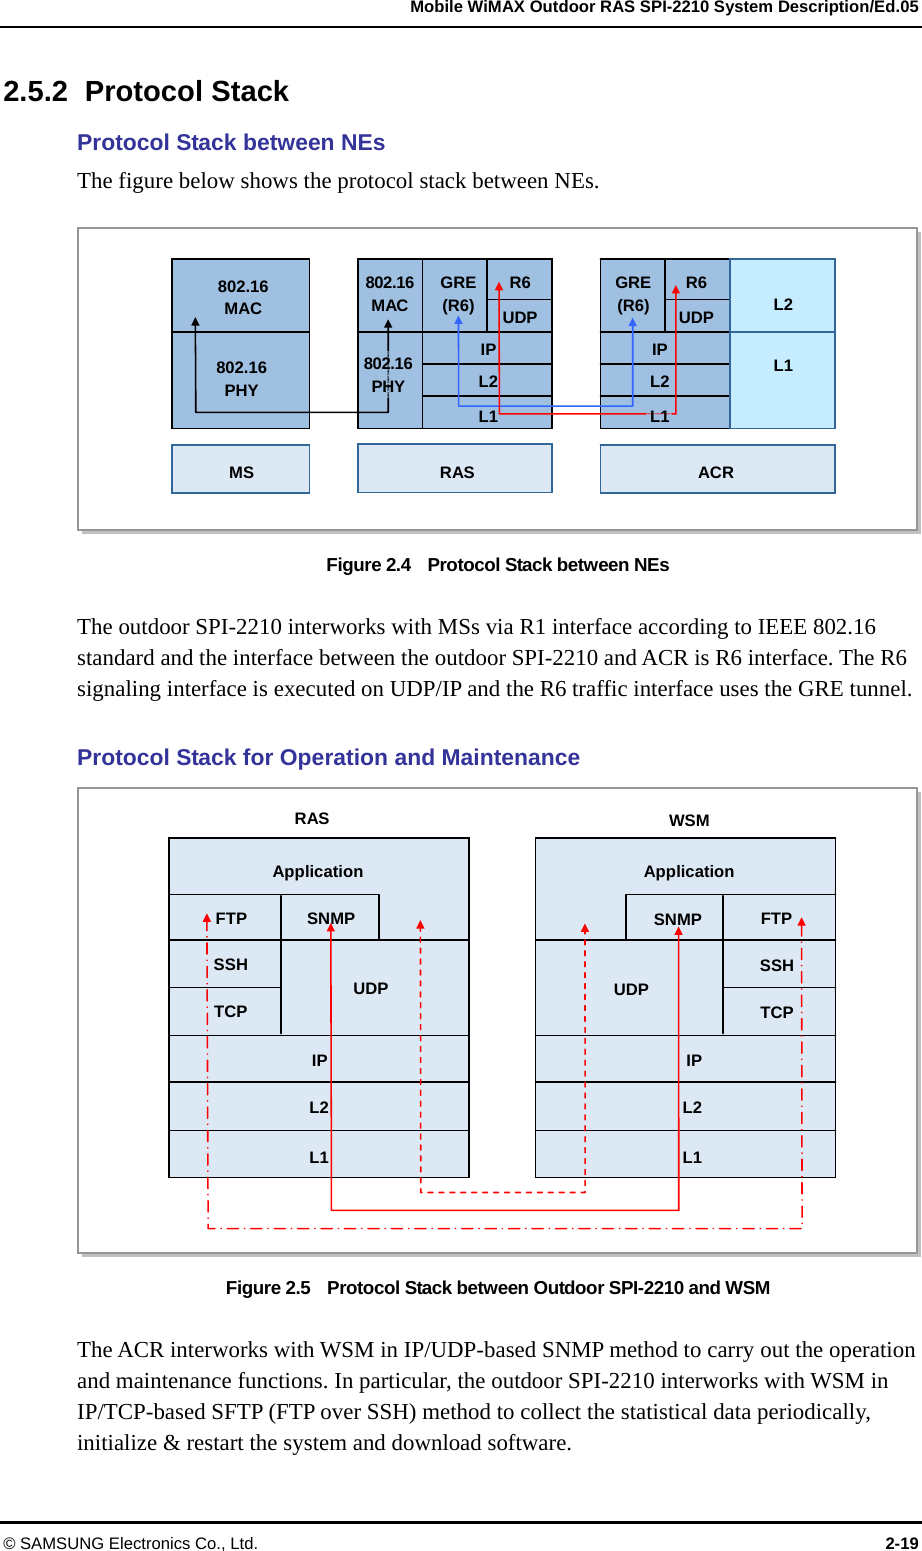   Mobile WiMAX Outdoor RAS SPI-2210 System Description/Ed.05 © SAMSUNG Electronics Co., Ltd.  2-19 2.5.2 Protocol Stack Protocol Stack between NEs   The figure below shows the protocol stack between NEs.  Figure 2.4    Protocol Stack between NEs  The outdoor SPI-2210 interworks with MSs via R1 interface according to IEEE 802.16 standard and the interface between the outdoor SPI-2210 and ACR is R6 interface. The R6 signaling interface is executed on UDP/IP and the R6 traffic interface uses the GRE tunnel.  Protocol Stack for Operation and Maintenance Figure 2.5    Protocol Stack between Outdoor SPI-2210 and WSM  The ACR interworks with WSM in IP/UDP-based SNMP method to carry out the operation and maintenance functions. In particular, the outdoor SPI-2210 interworks with WSM in IP/TCP-based SFTP (FTP over SSH) method to collect the statistical data periodically, initialize &amp; restart the system and download software. WSM RAS IP ApplicationFTP TCP SSHFTP TCP SSHL2 IP Application SNMPUDP UDPSNMPL1 L2 L1 16PHY802.16  MAC 802.16  PHY 802.16MAC GRE(R6)R6UDPIPL2L1MS RAS  ACR GRE(R6)R6 UDP  L2 L1 IPL2L1802.16PHY 